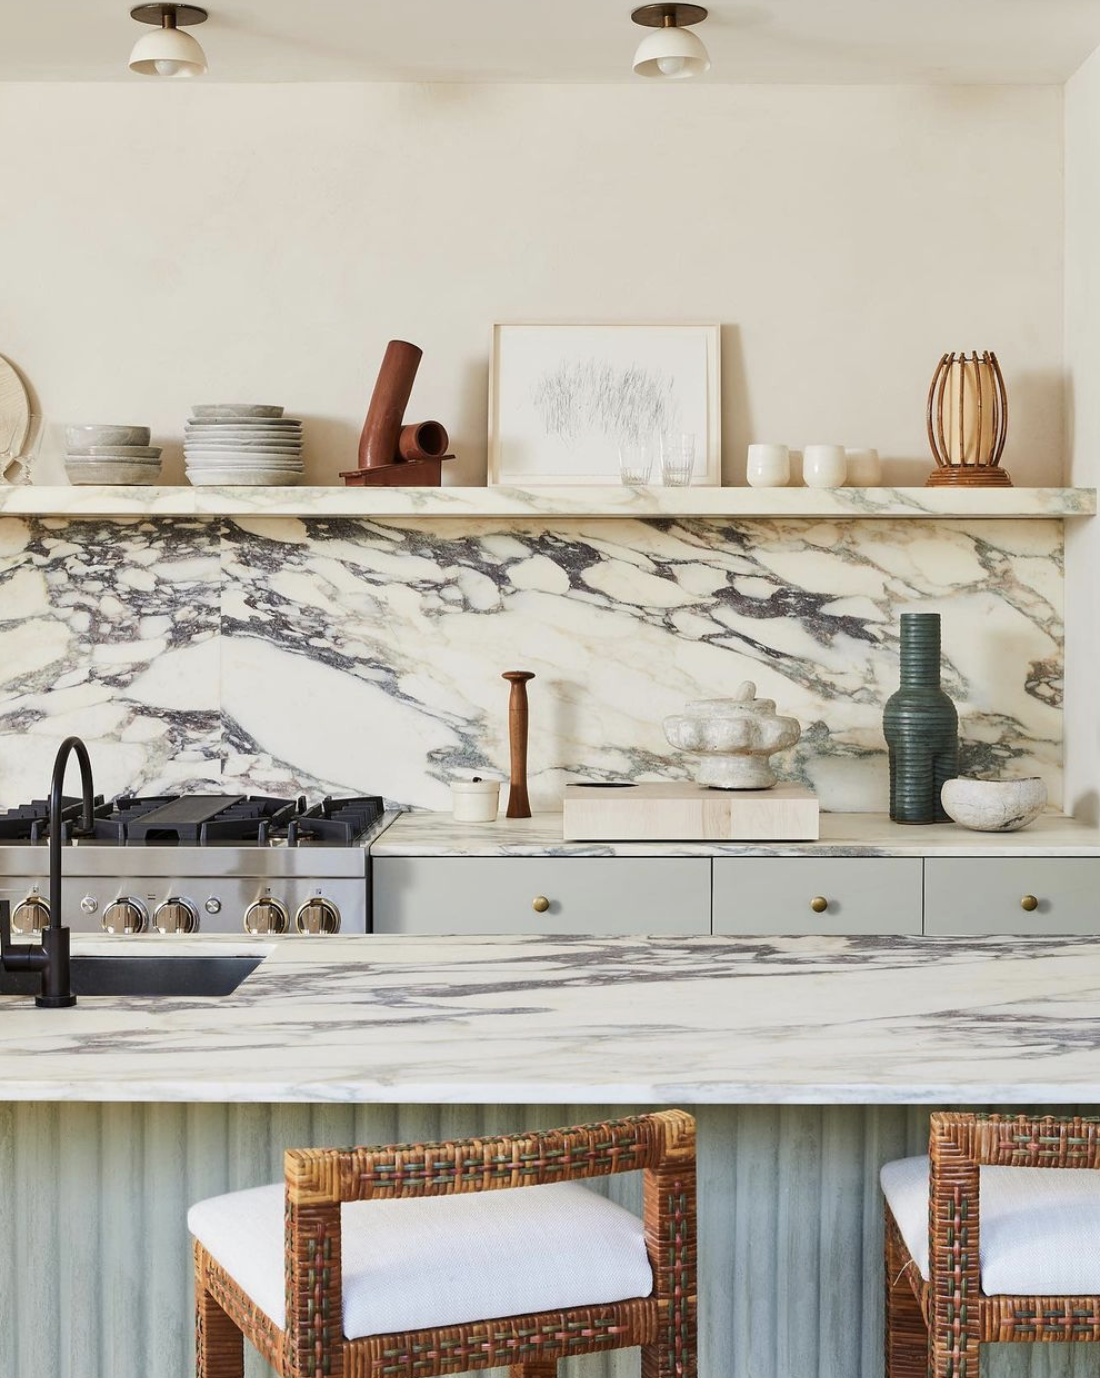 Should You Install Soapstone Countertops? The Pros and Cons